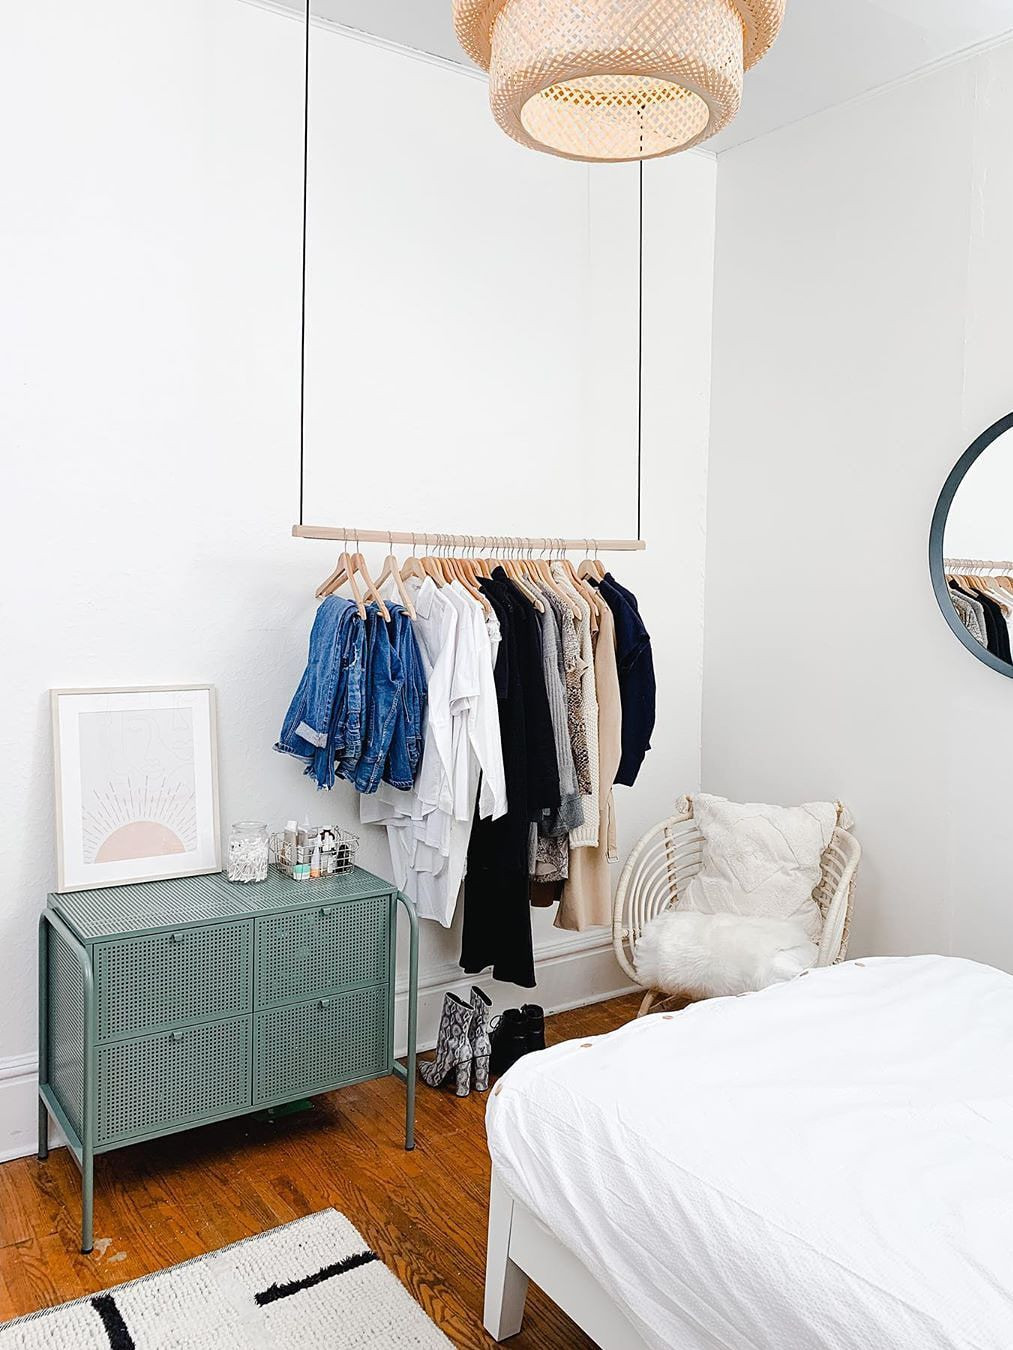 DIY Hanging Clothes Rack From Ceiling
 How to DIY a Ceiling Mounted Clothes Rack in 3 Easy Steps